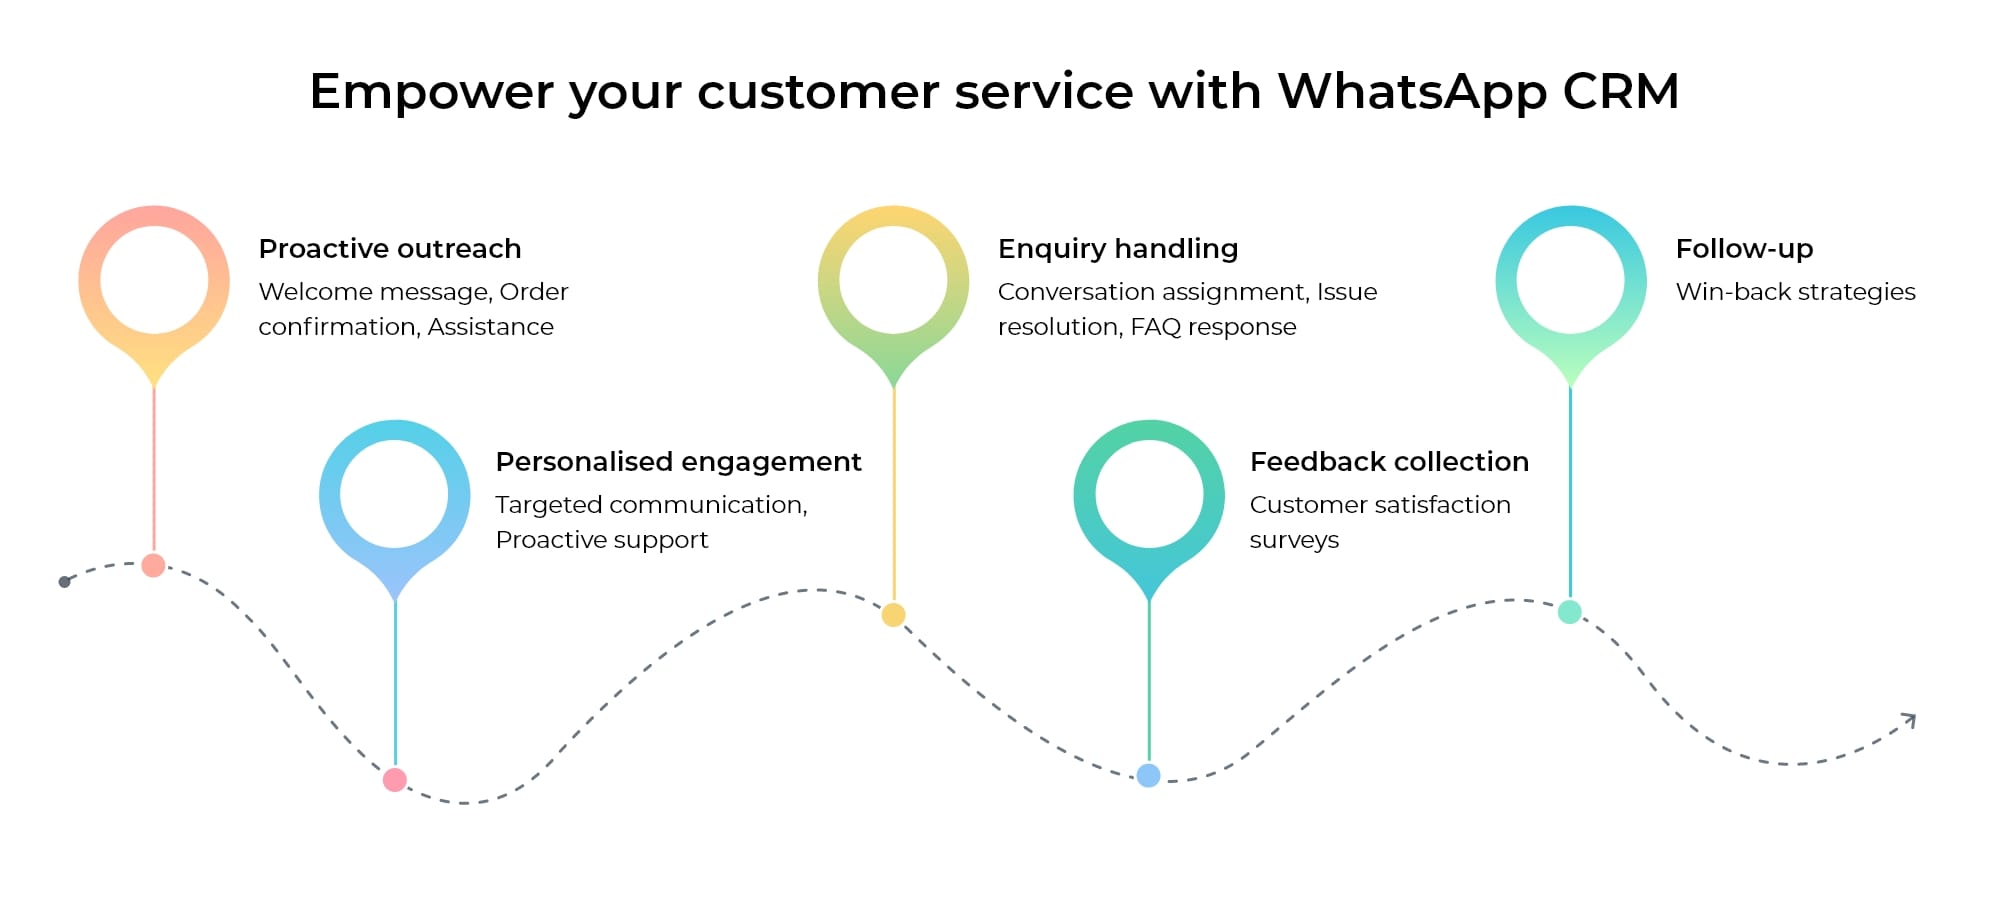 5 Must-try WhatsApp CRM techniques to drive customer engagement